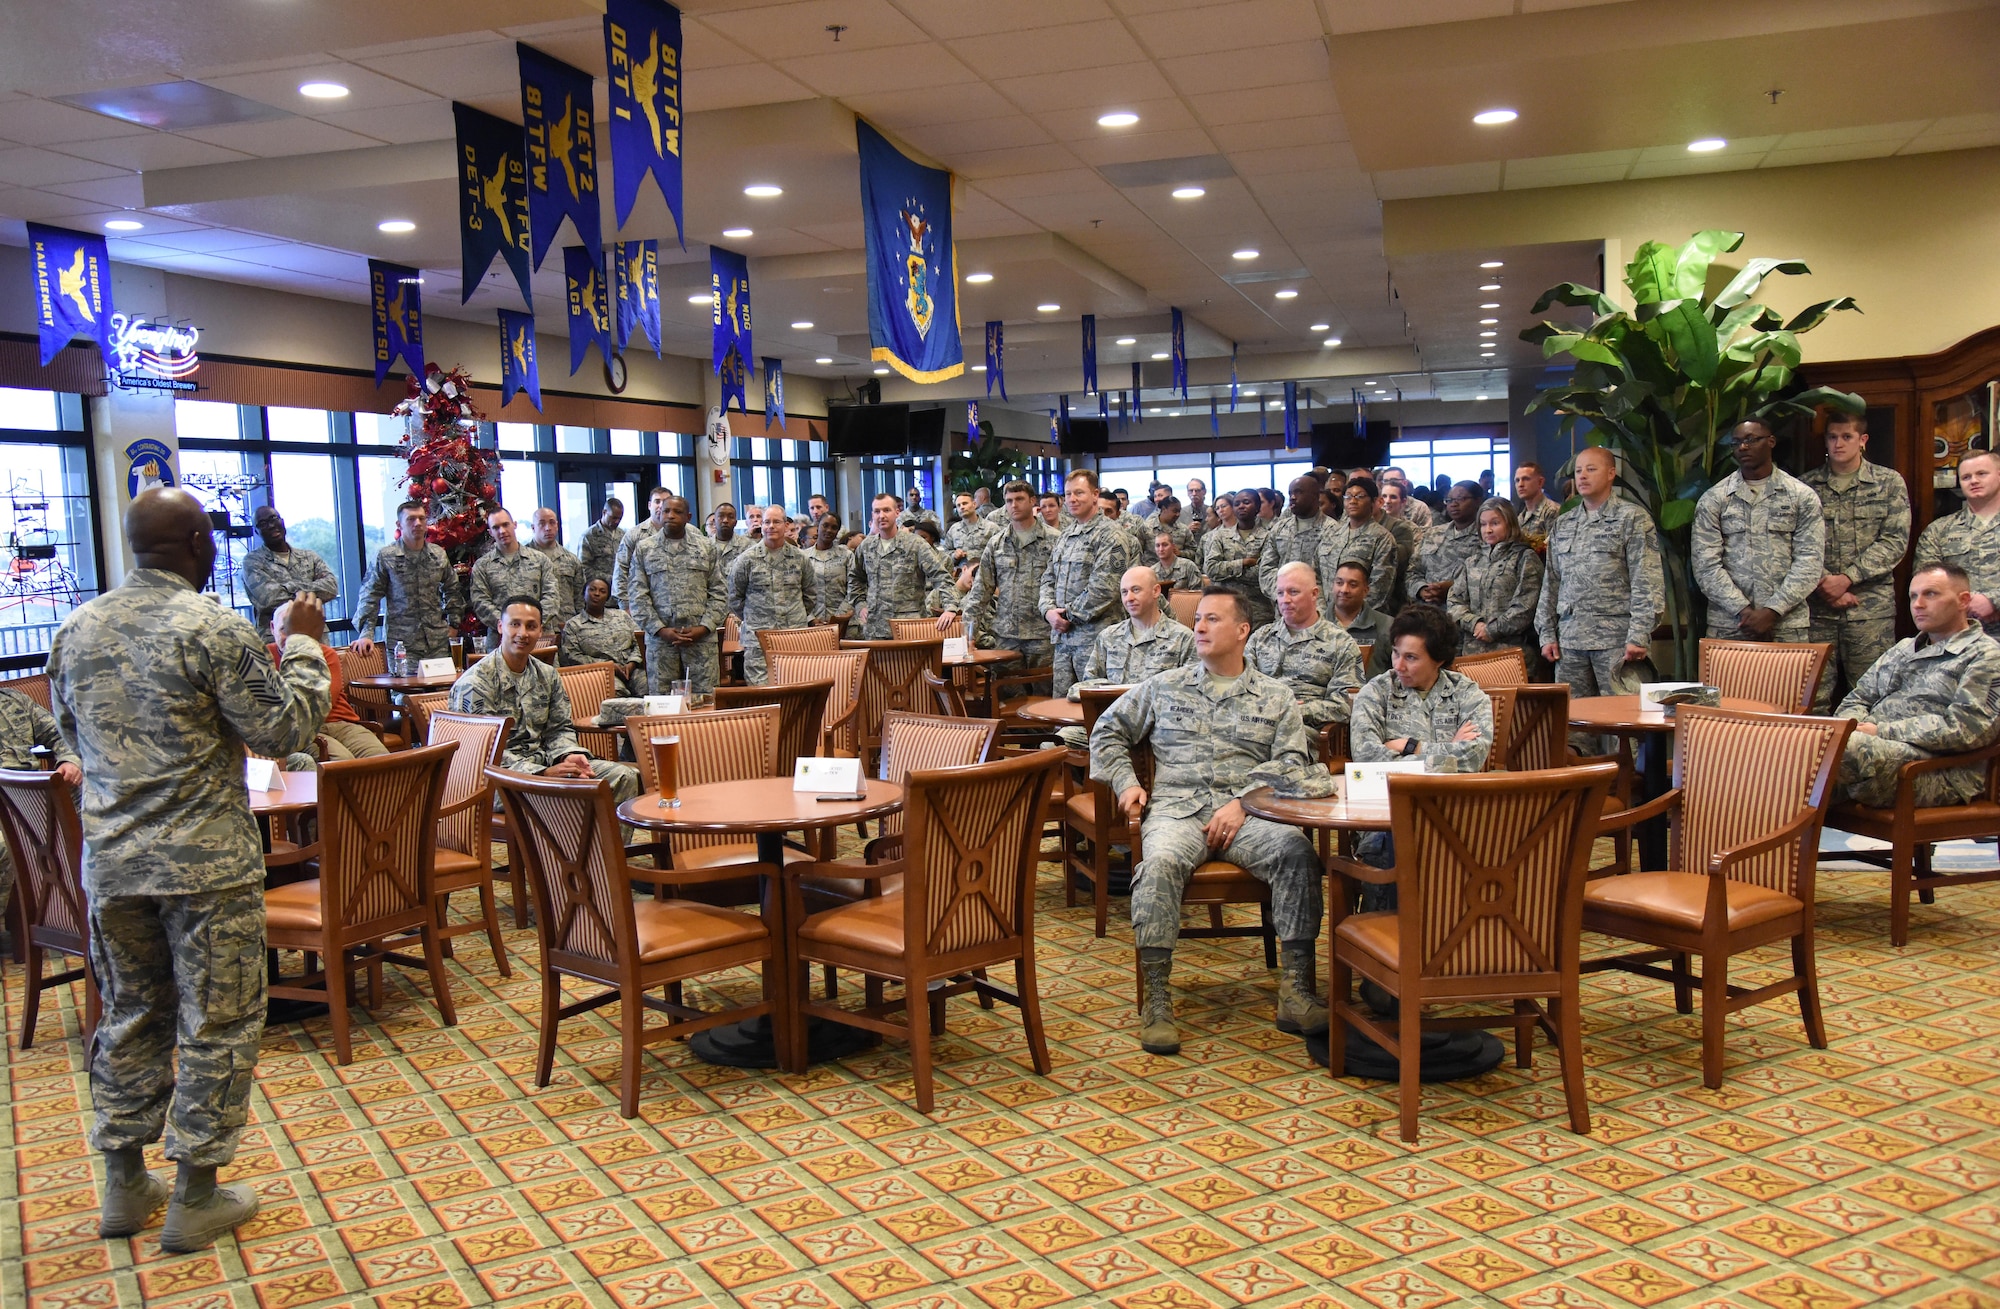 Chief Master Sgt. Vegas Clark, 81st Training Wing command chief, delivers remarks during a chief master sergeant-select recognition ceremony at the Bay Breeze Event Center Dec. 8, 2016, on Keesler Air Force Base, Miss. He recognized three Keesler senior NCOs, Senior Master Sgts. Timothy Carentz, 81st Medical Operations Squadron superintendent, Jeffrey Bankoske, Mathies NCO Academy director of education, and Larry Jackson, 81st Operations Support Flight superintendent, for their selection to join the top 1 percent of the Air Force’s enlisted force. (U.S. Air Force photo by Kemberly Groue)